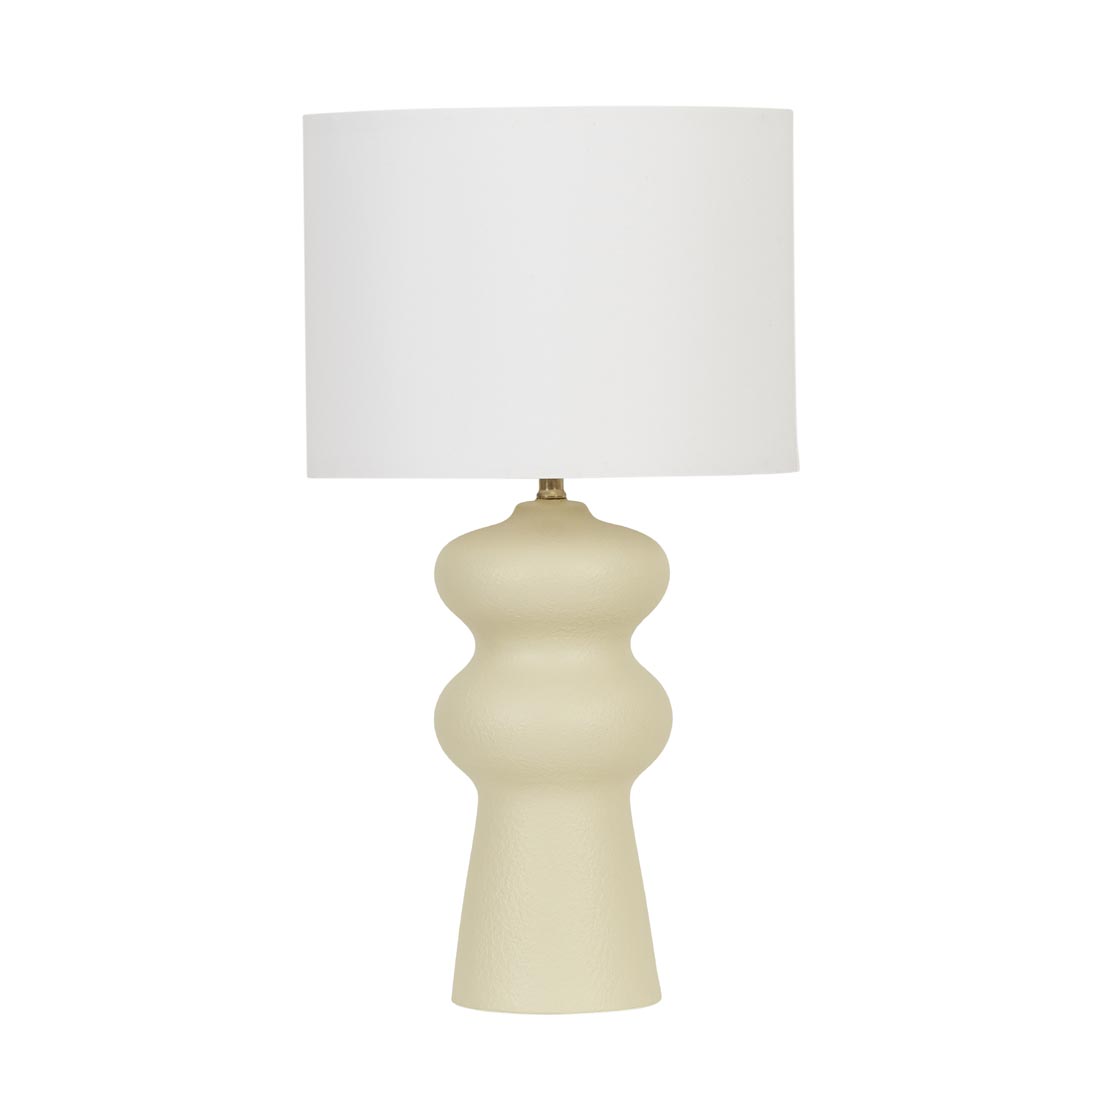 Lorne Vally Table Lamp image 6